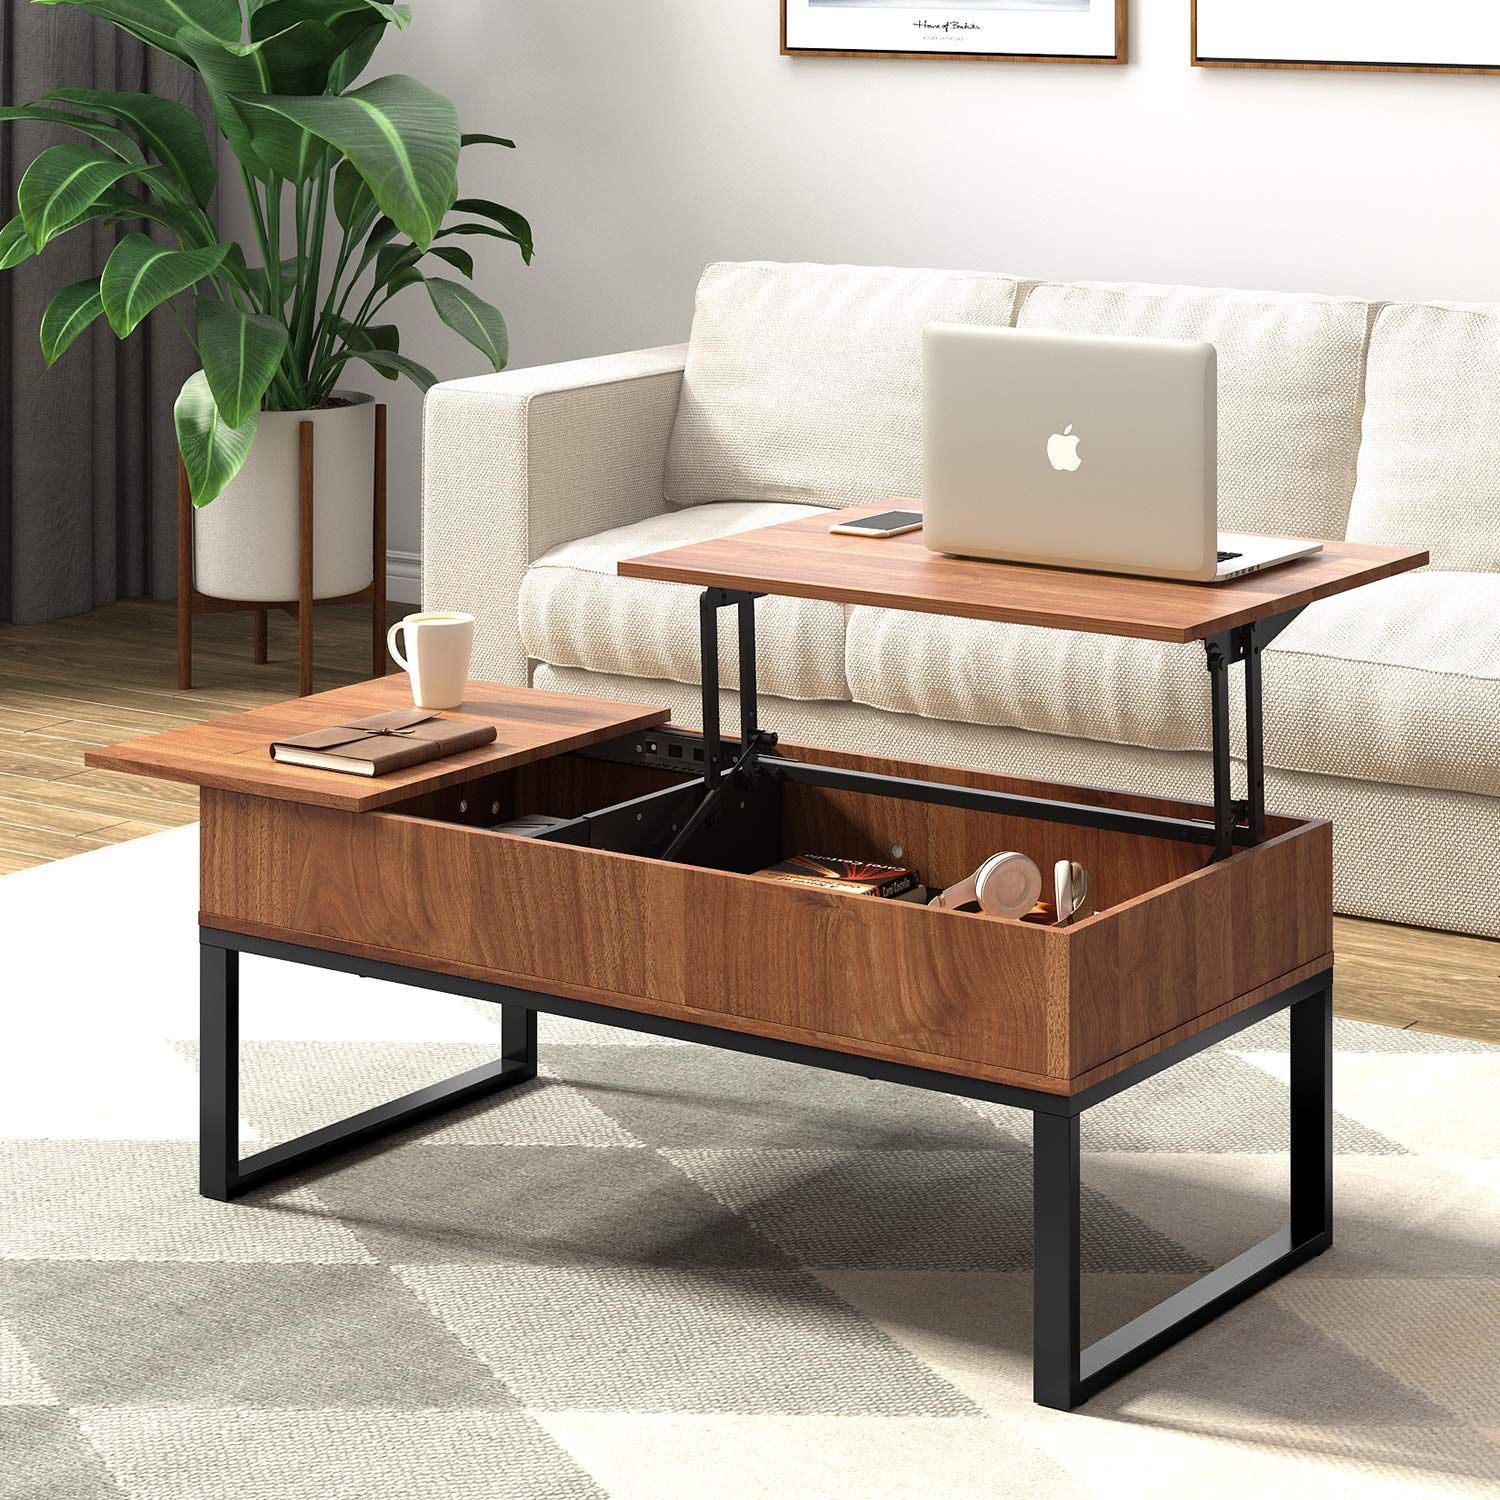 Wlive Wood Coffee Table With Adjustable Lift Top Table, Metal Frame Intended For Modern Coffee Tables With Hidden Storage Compartments (View 12 of 15)